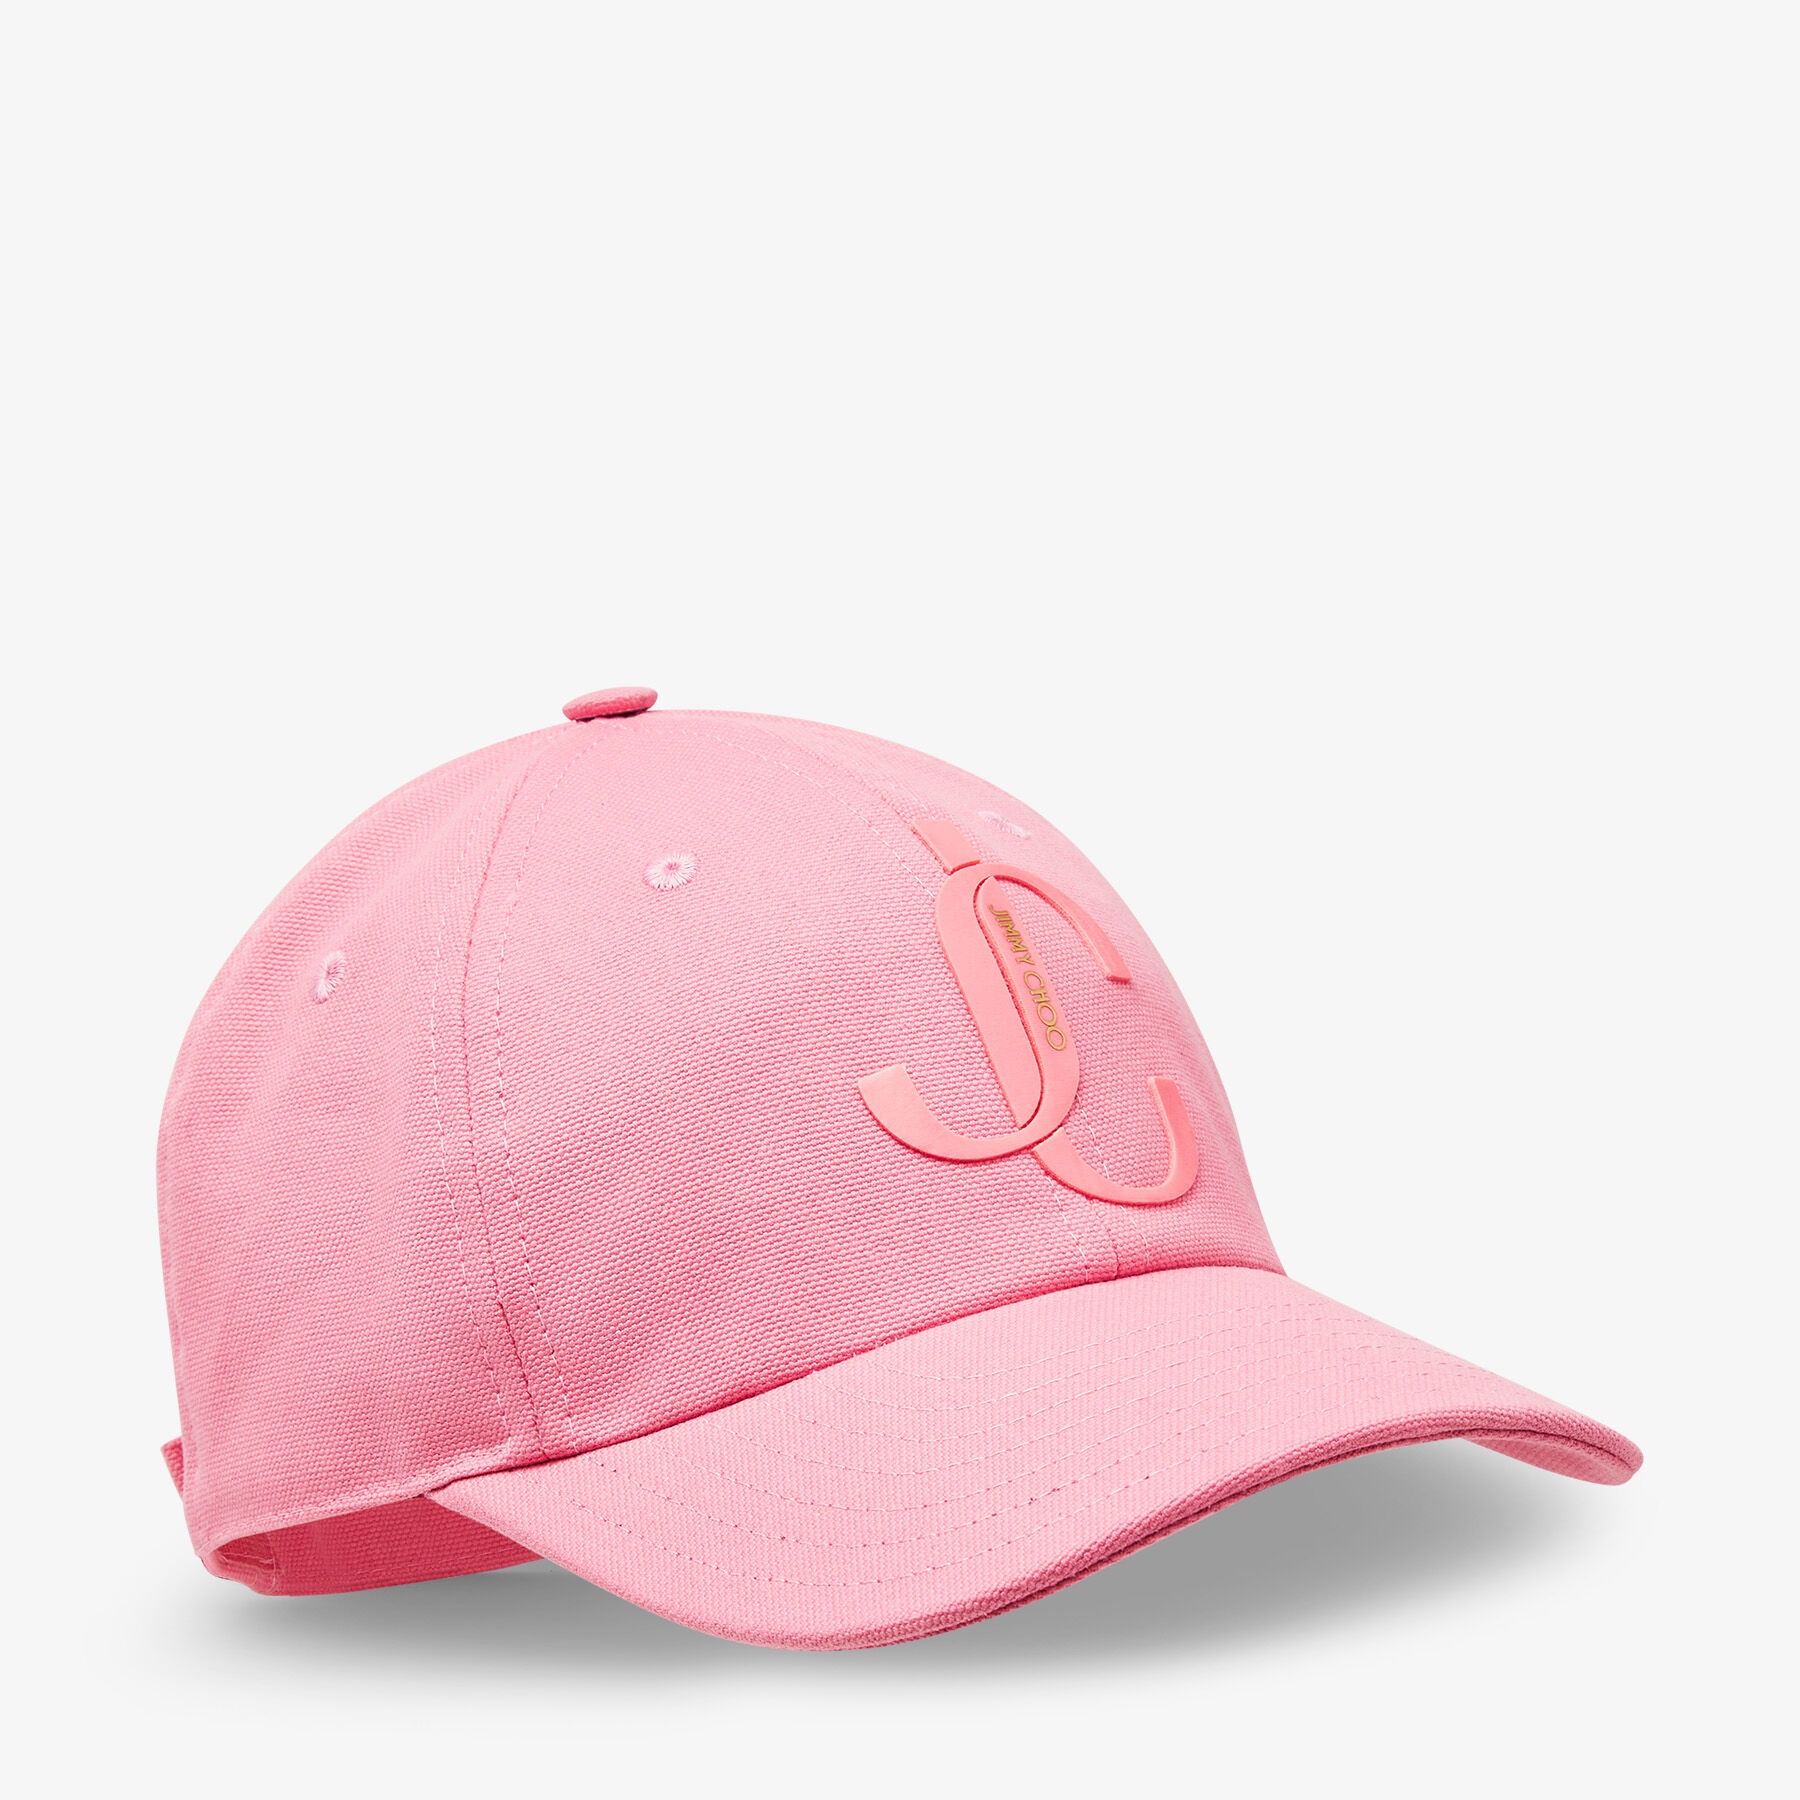 Paxy
Candy Pink Cotton Baseball Cap with Shiny JC Monogram - 2